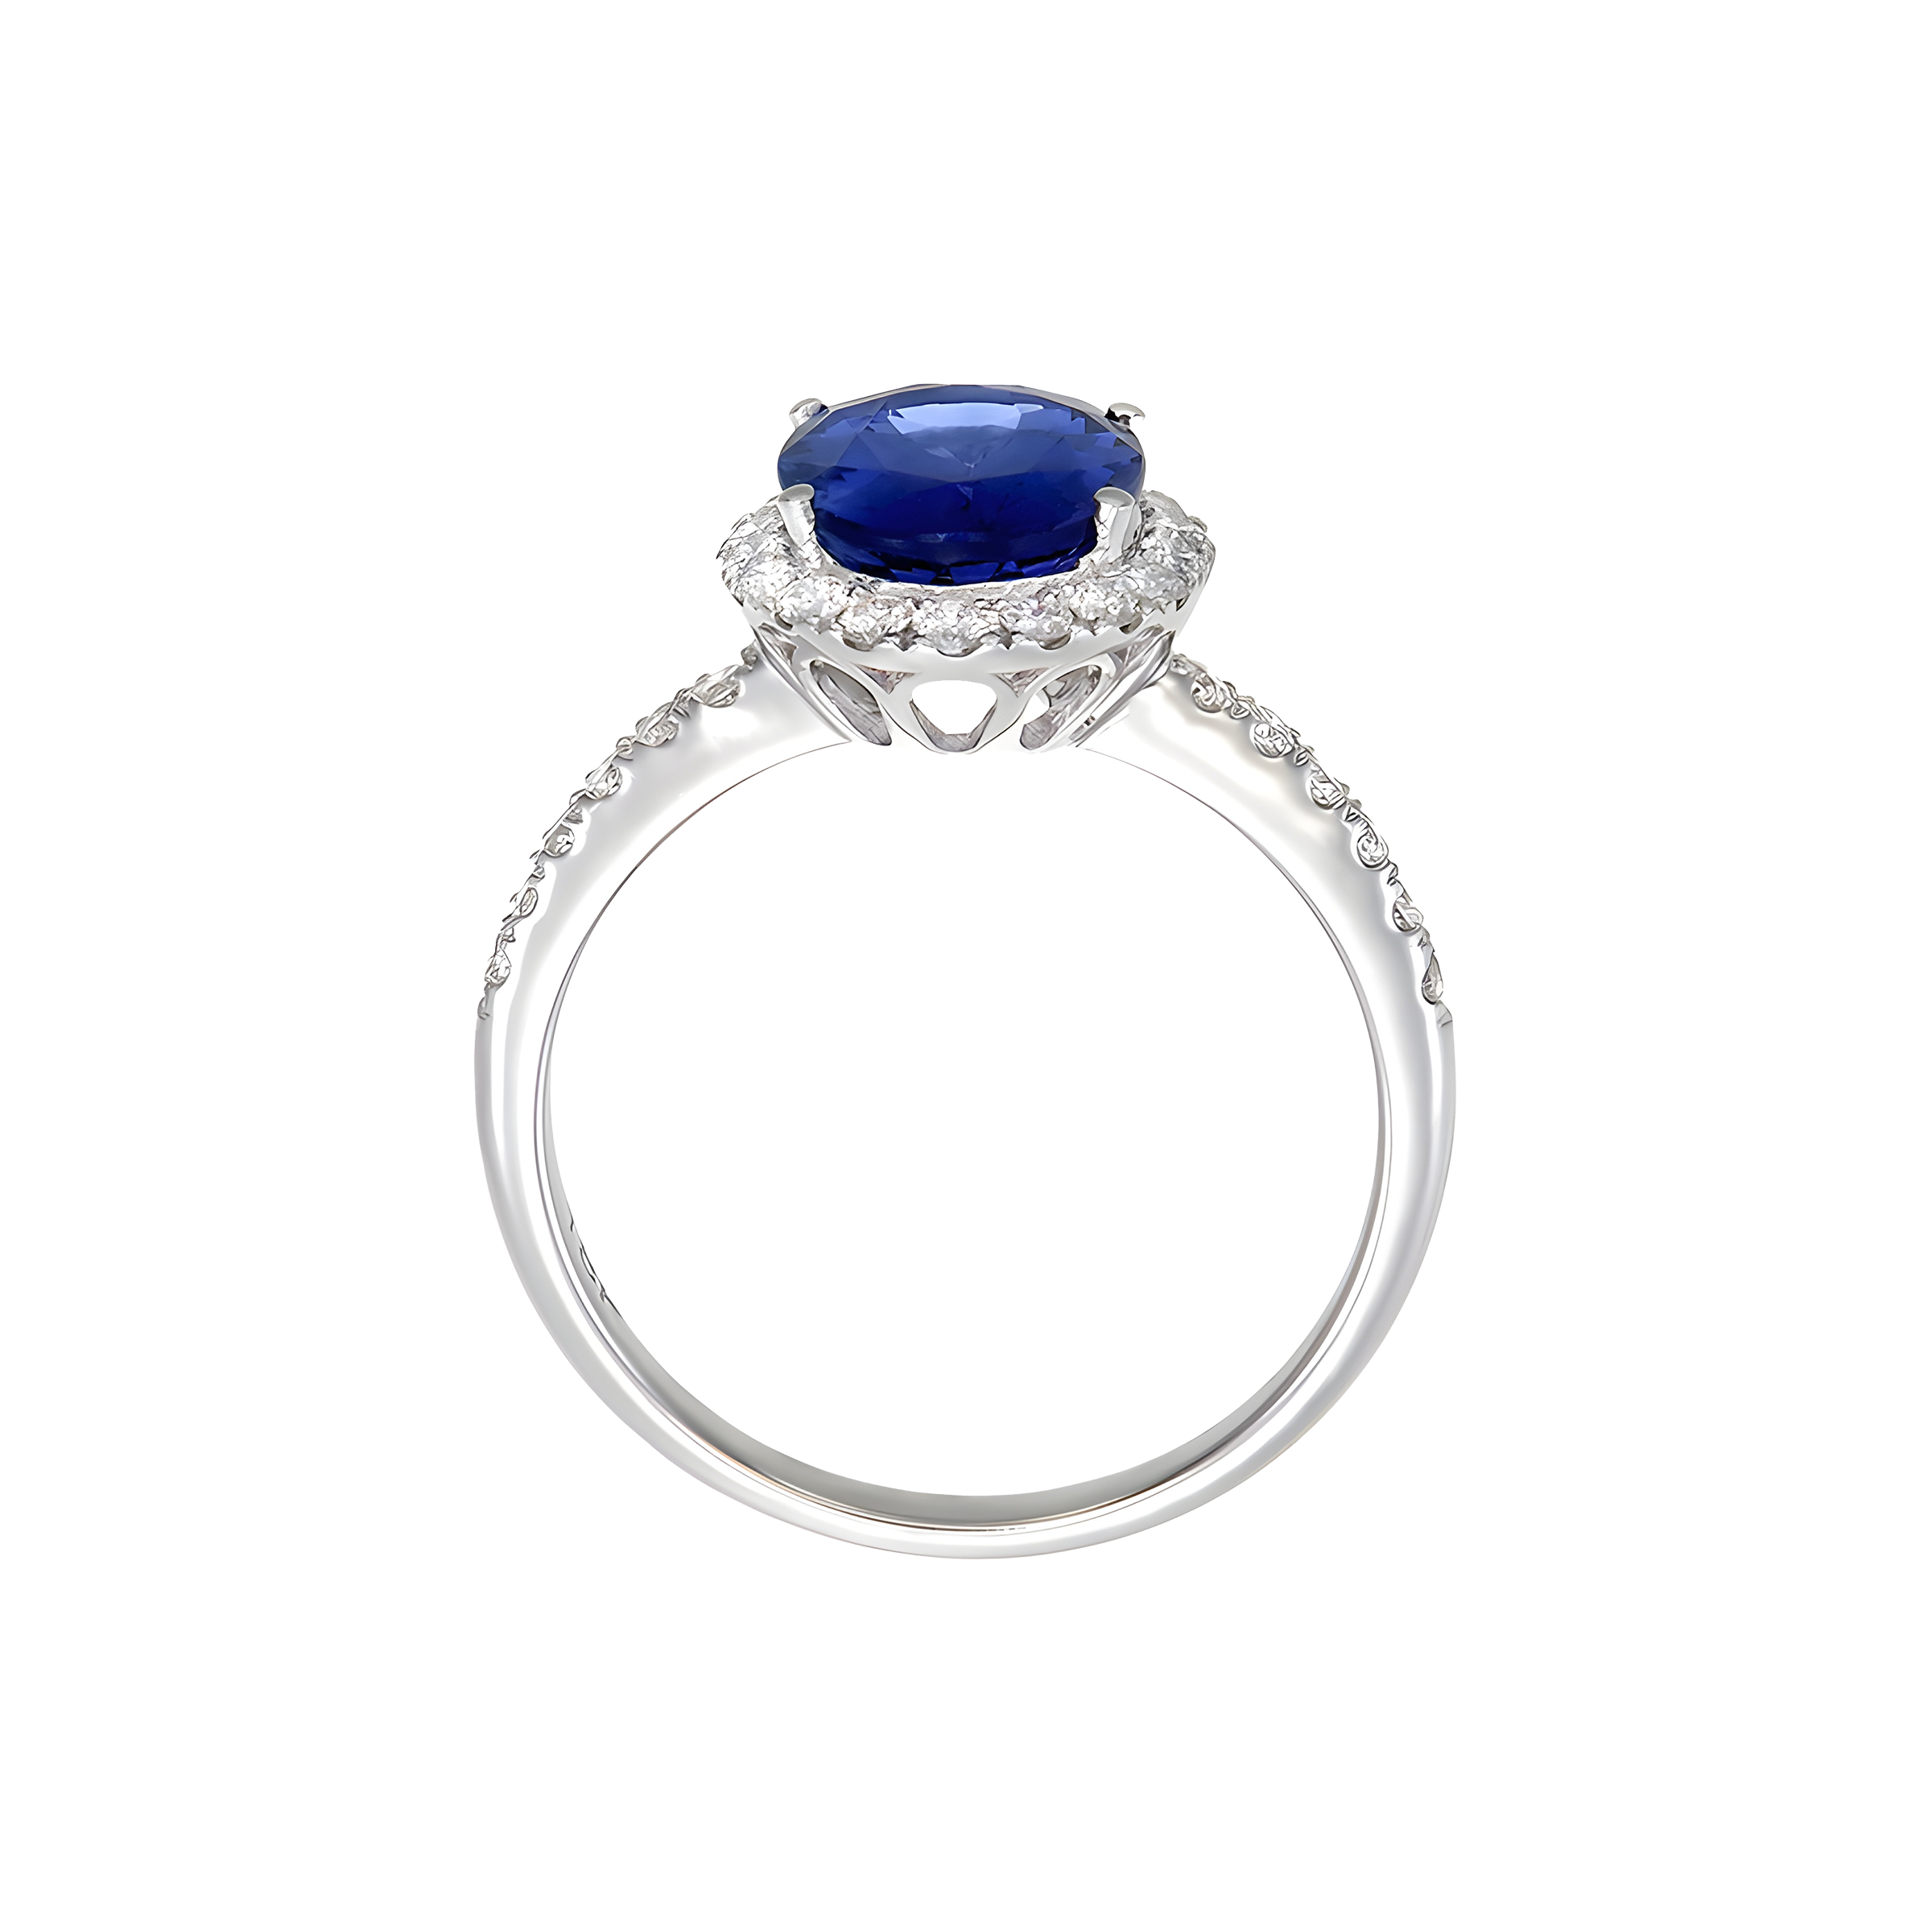 Oval Tanzanite and Diamond Halo Ring in 18k White Gold